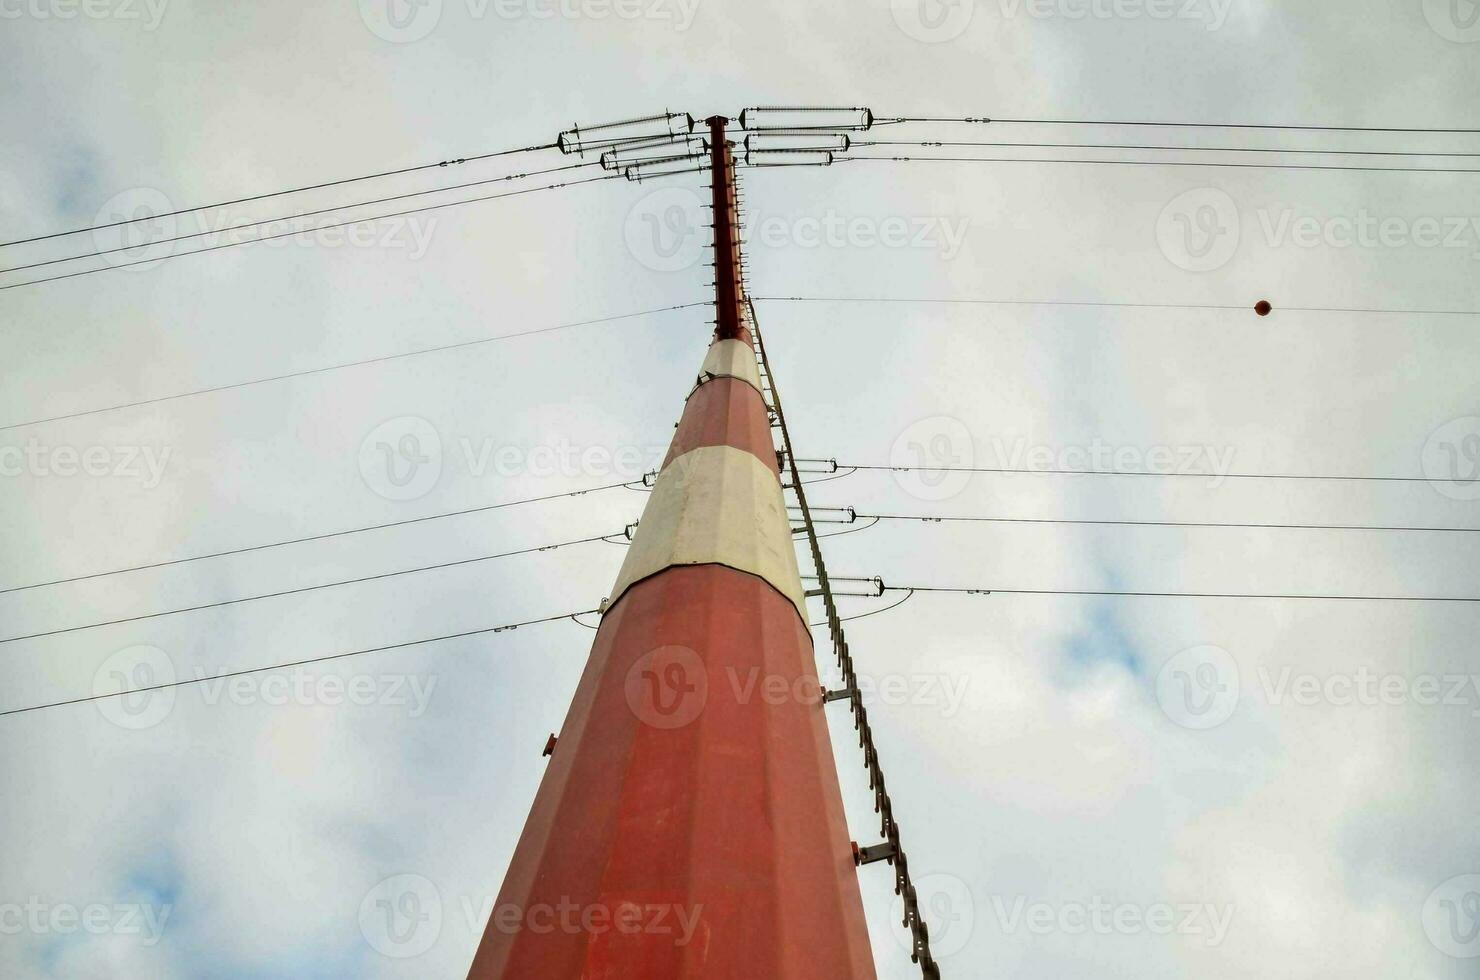 a red and white pole with wires on top photo